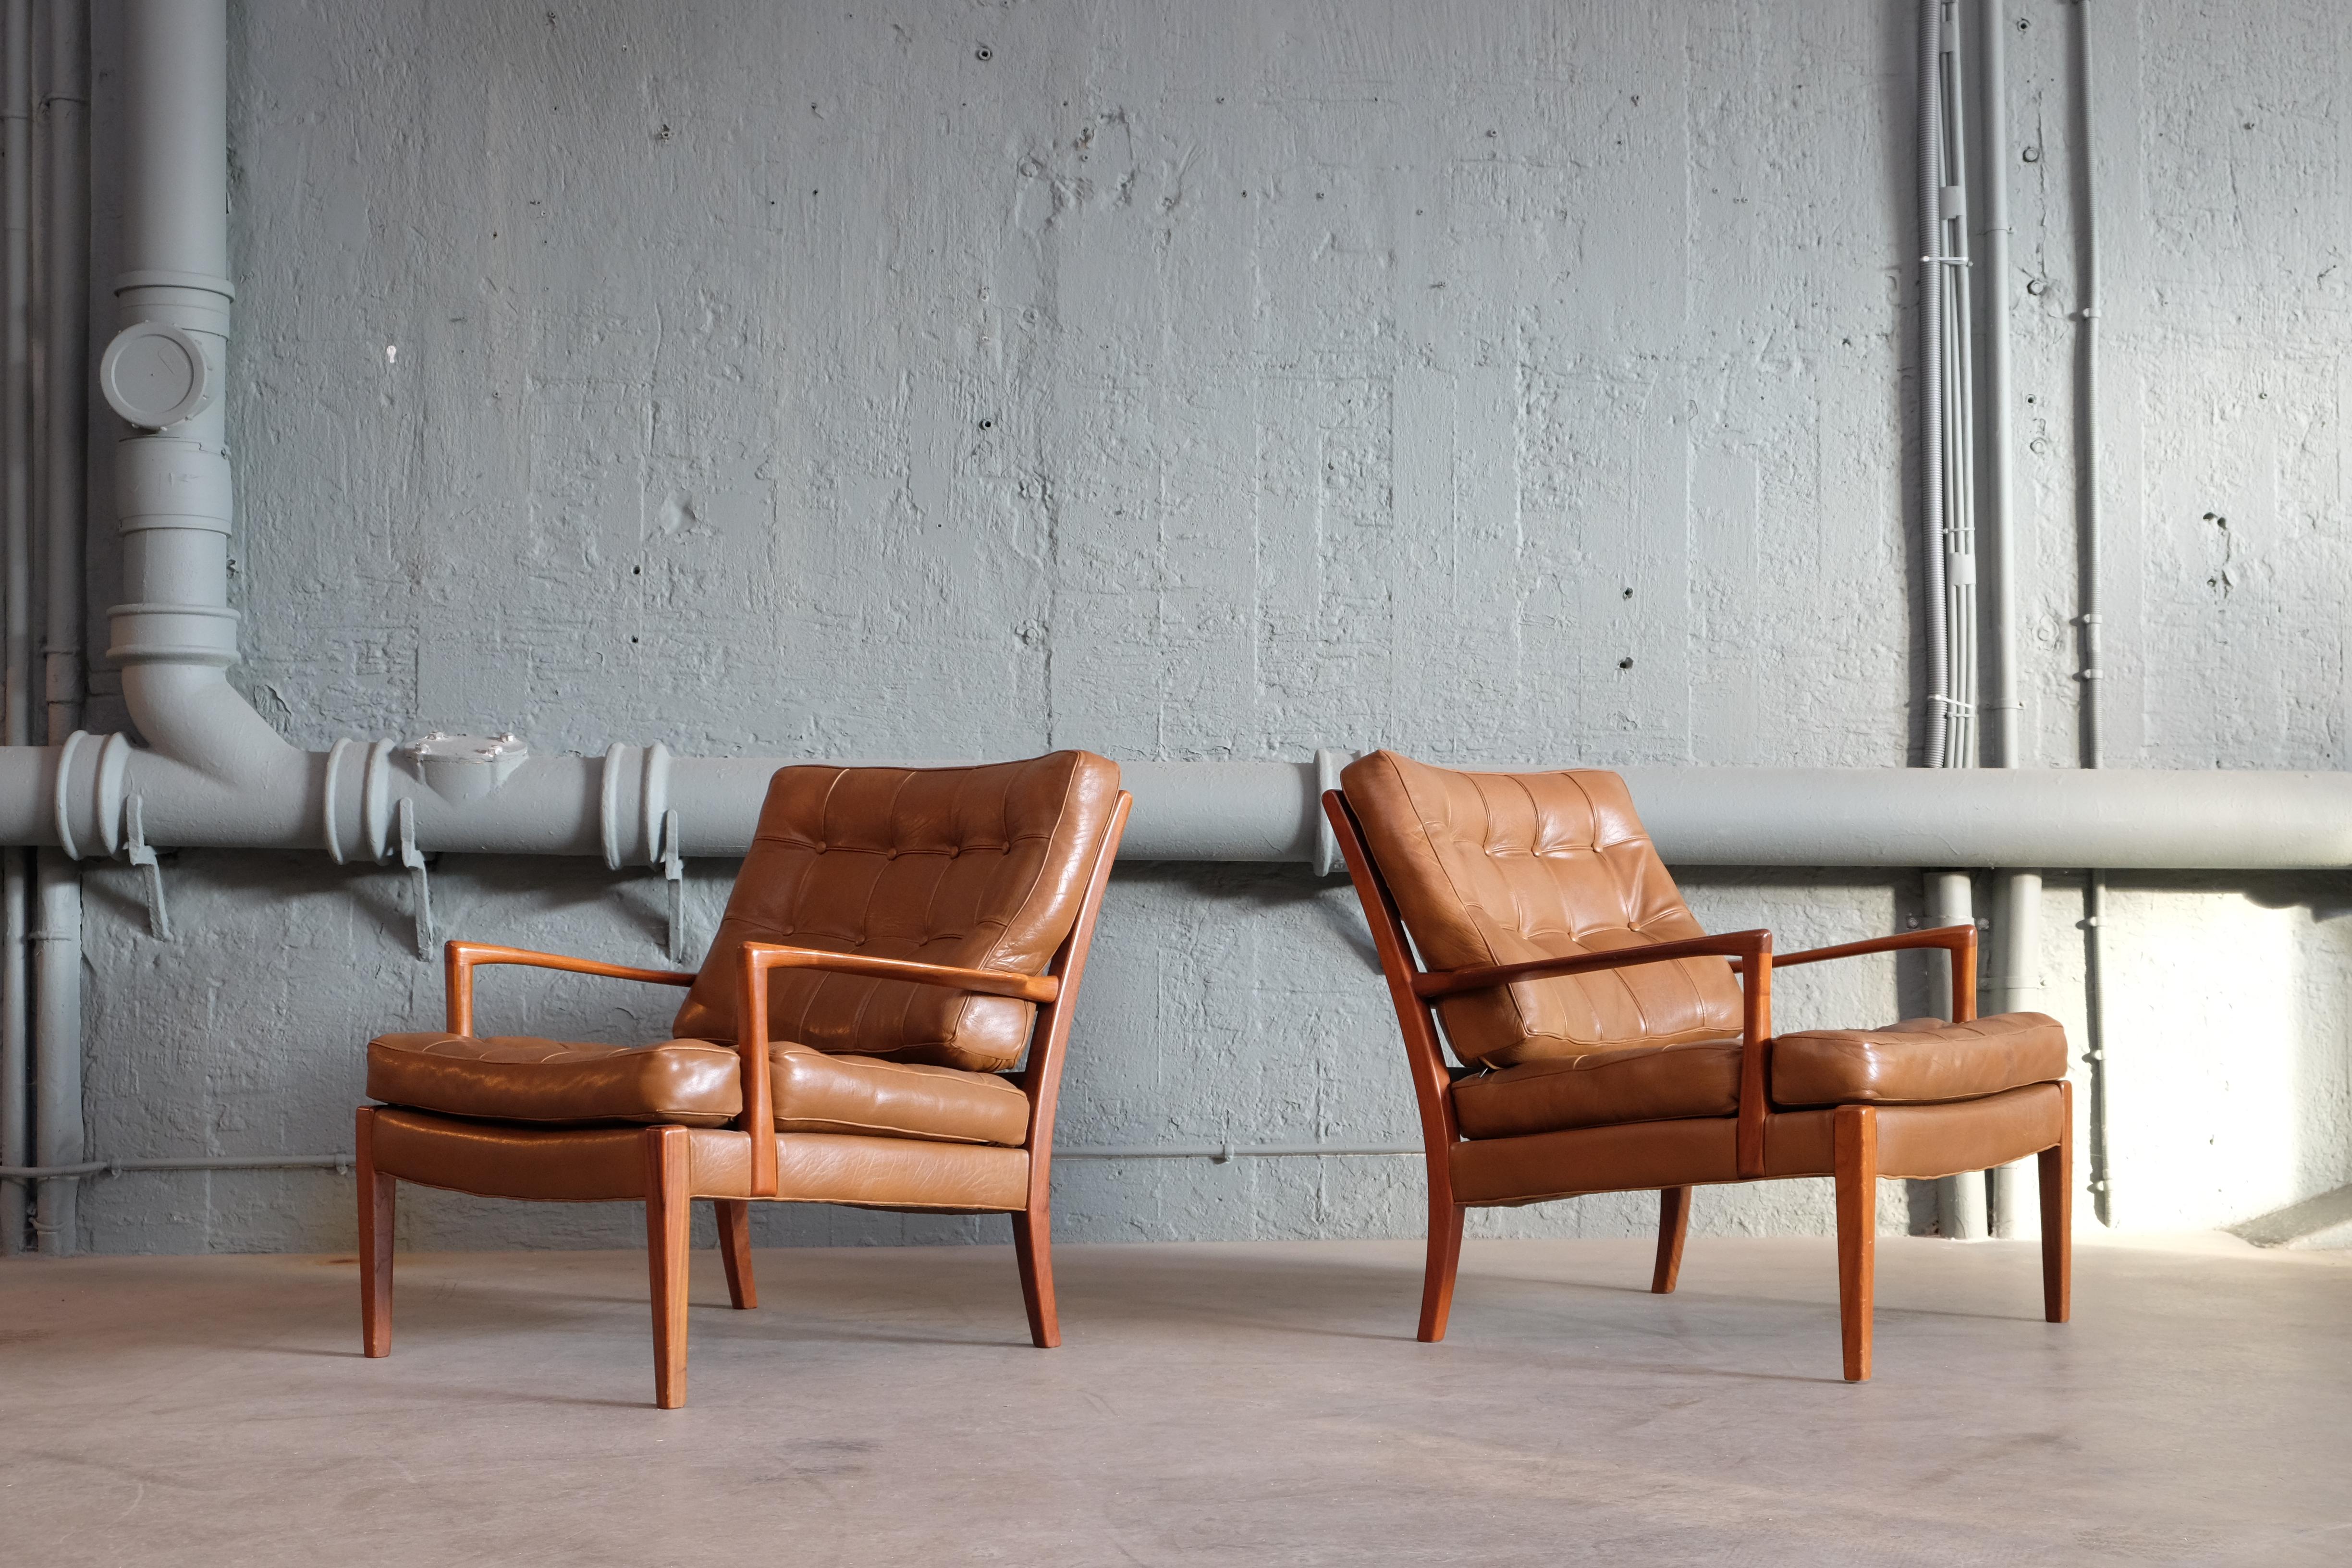 Easy chairs model Löven designed by Arne Norell. Produced by Arne Norell AB in Aneby, Sweden, 1960s.
Original leather.